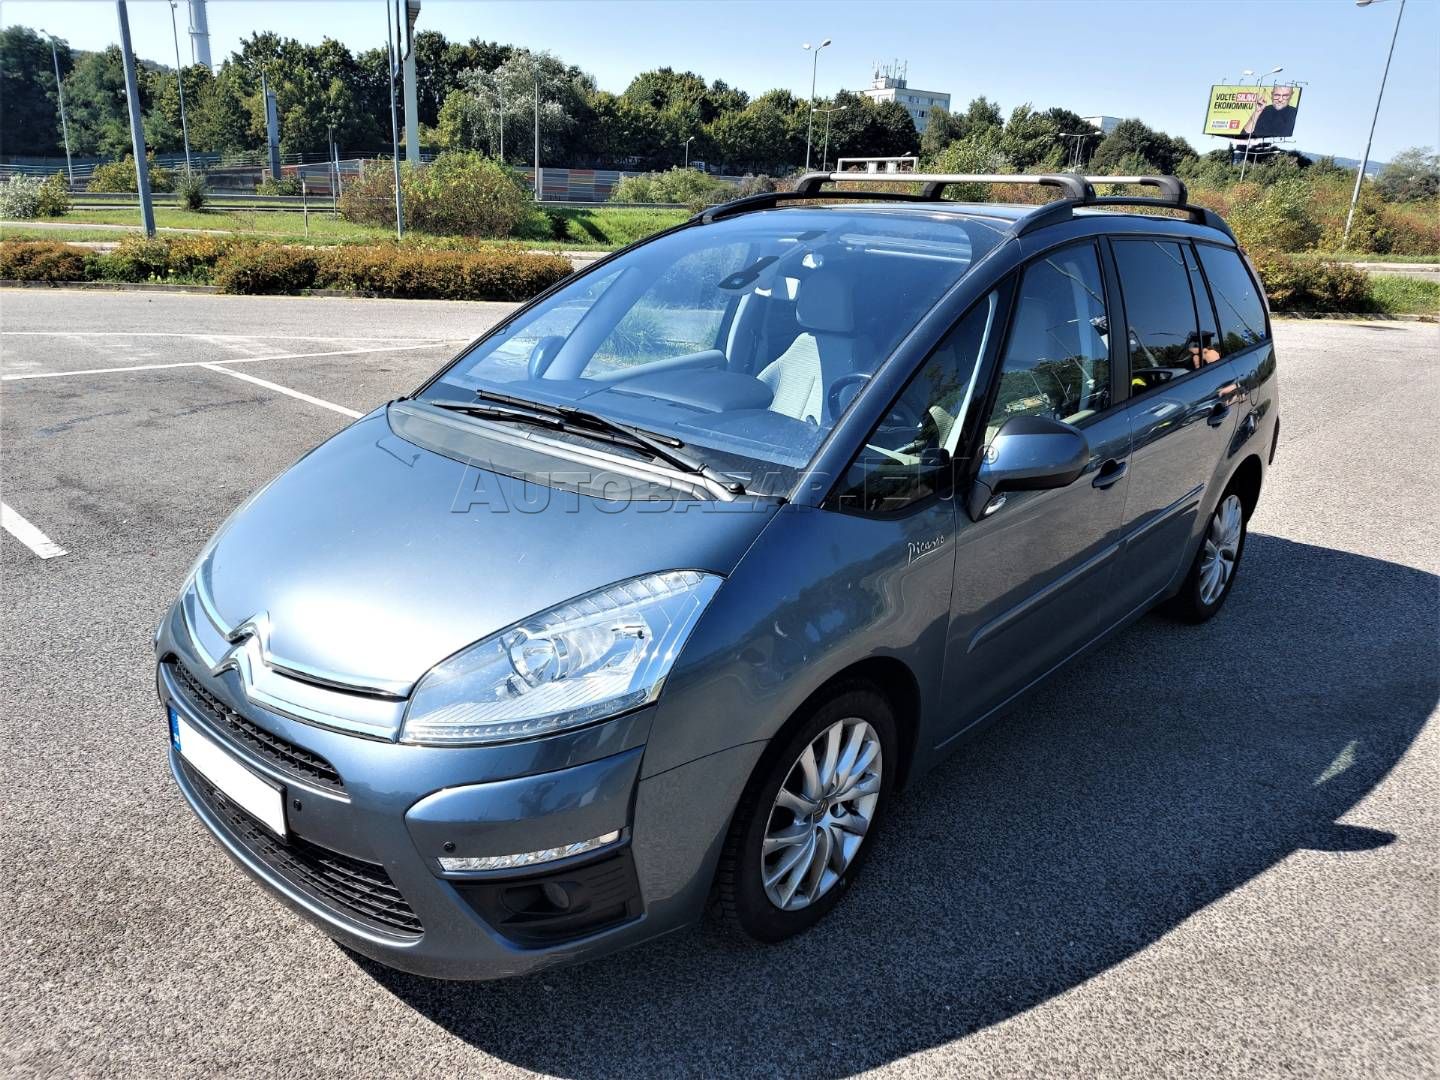 Citroën C4 Grand Picasso 2.0 HDi 16V 150k Best Collection 2